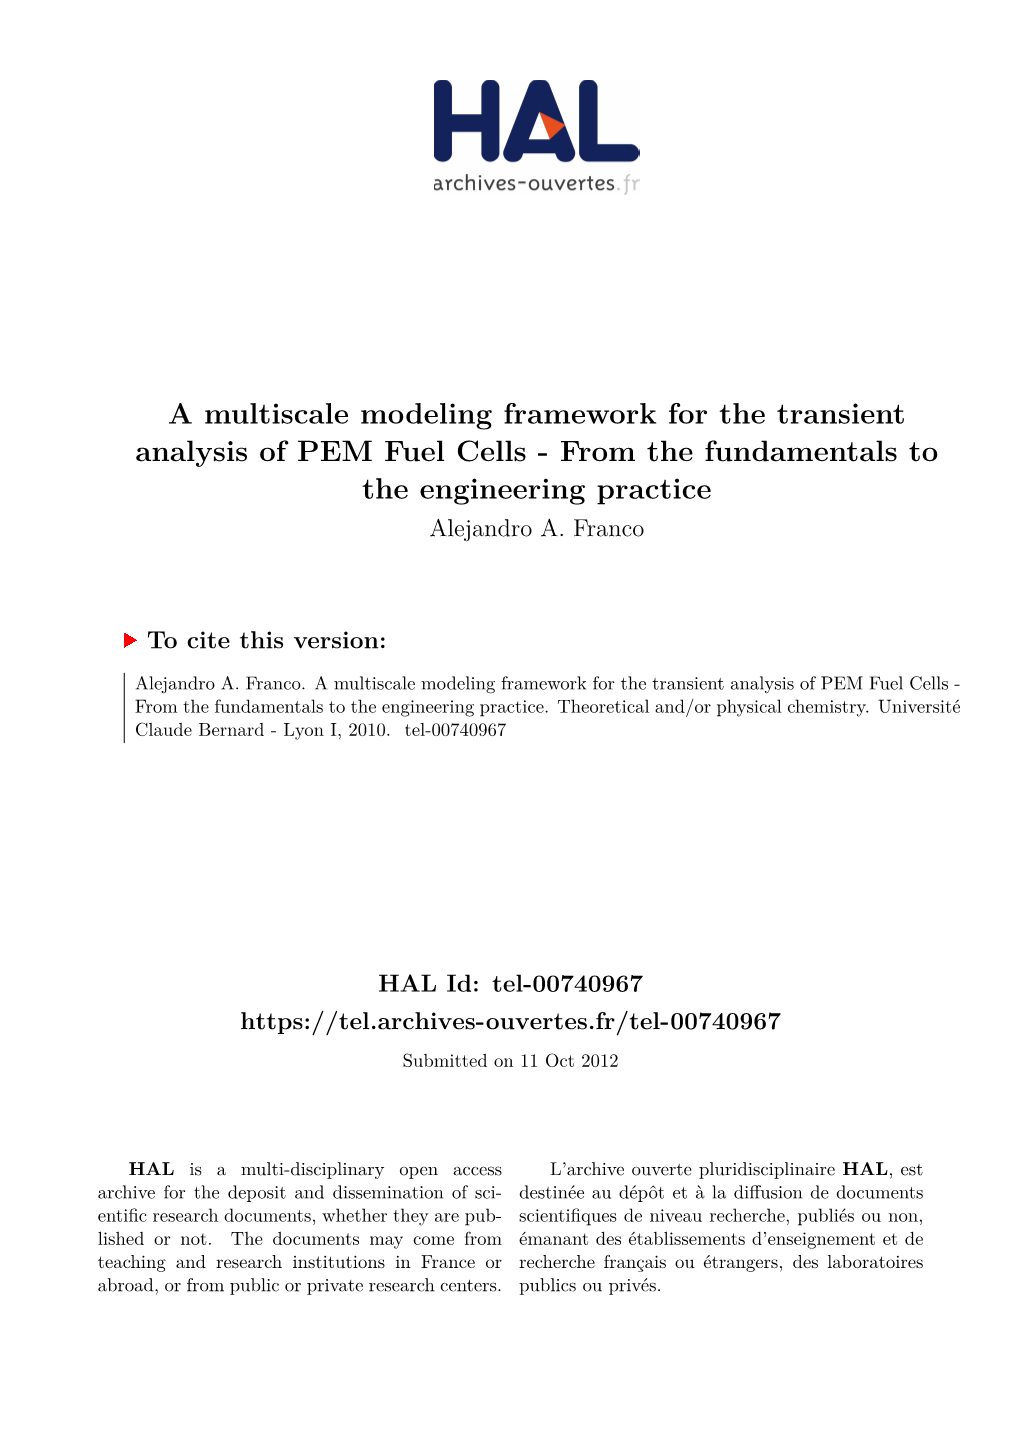 A Multiscale Modeling Framework for the Transient Analysis of PEM Fuel Cells - from the Fundamentals to the Engineering Practice Alejandro A